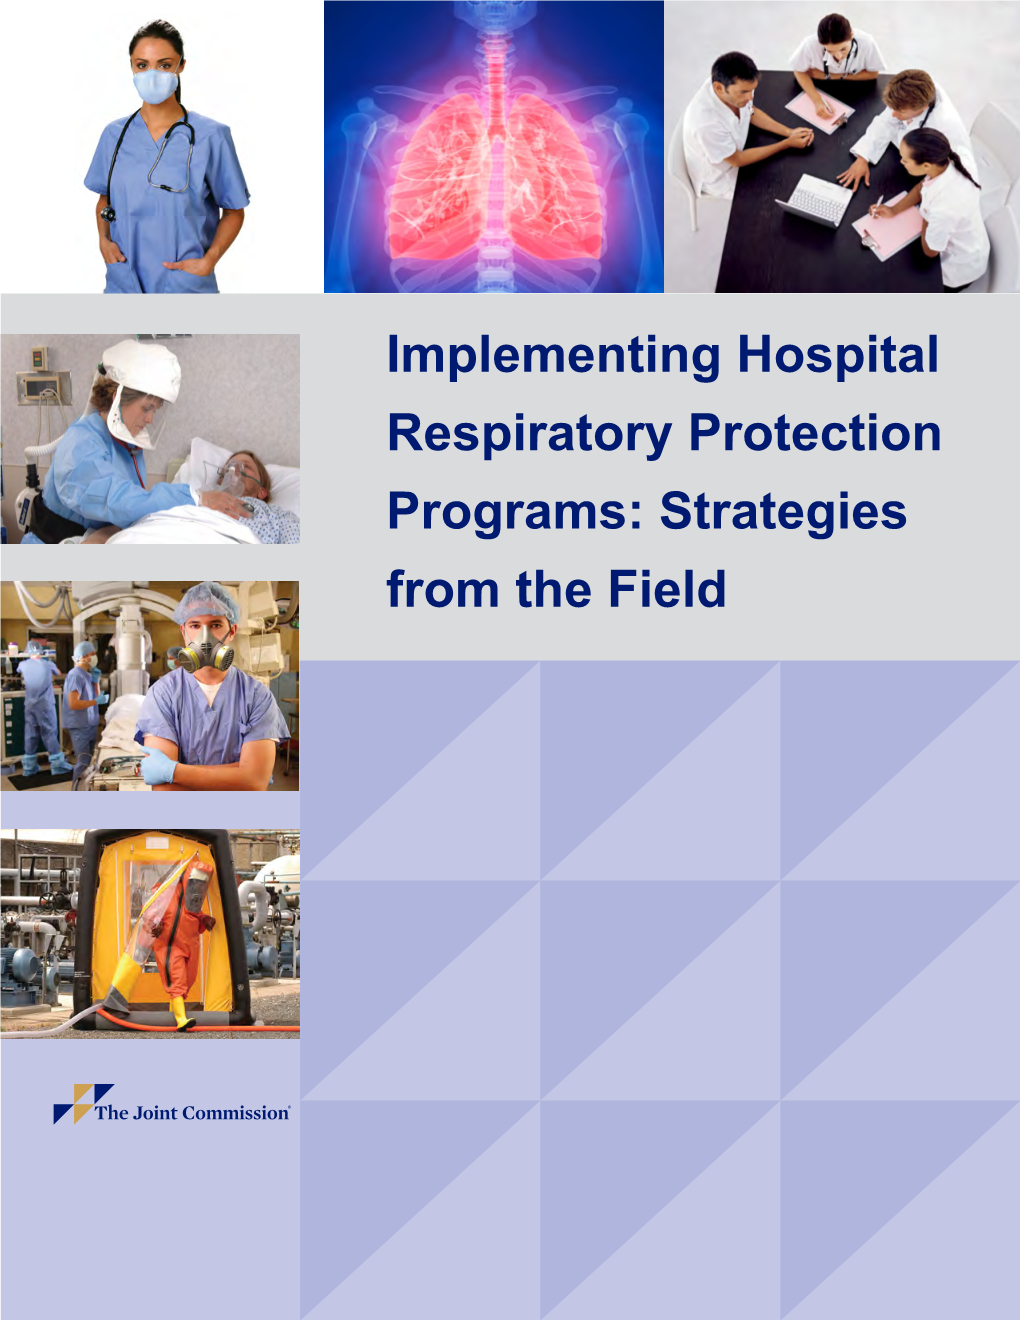 Implementing Hospital Respiratory Protection Programs: Strategies from the Field